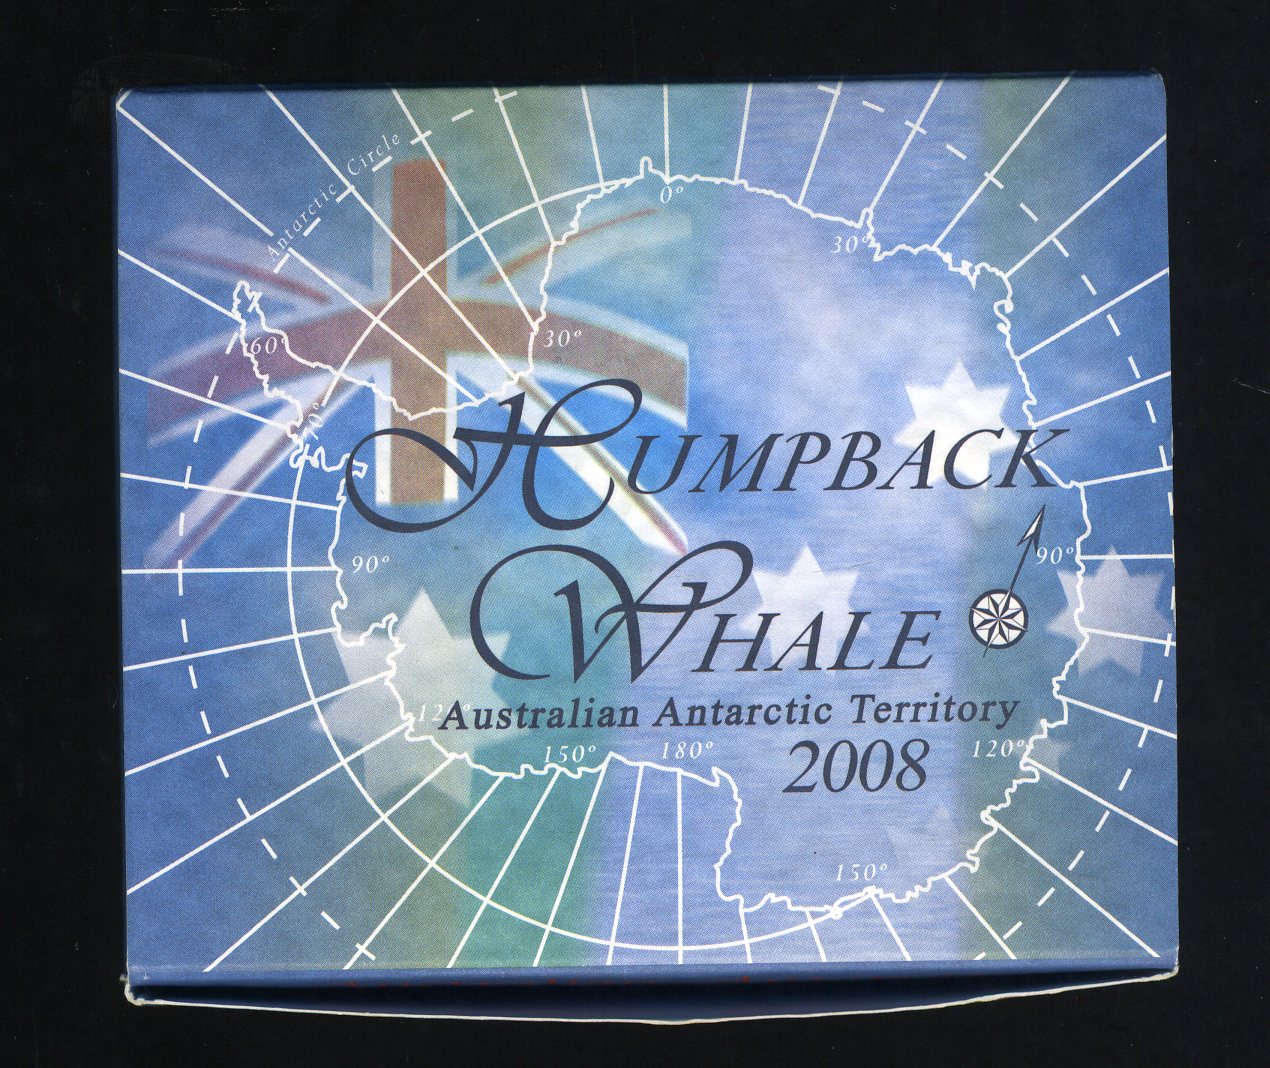 Thumbnail for 2008 1oz Coloured Silver Proof Coin Australian Antartic Territory - Humpback Whale